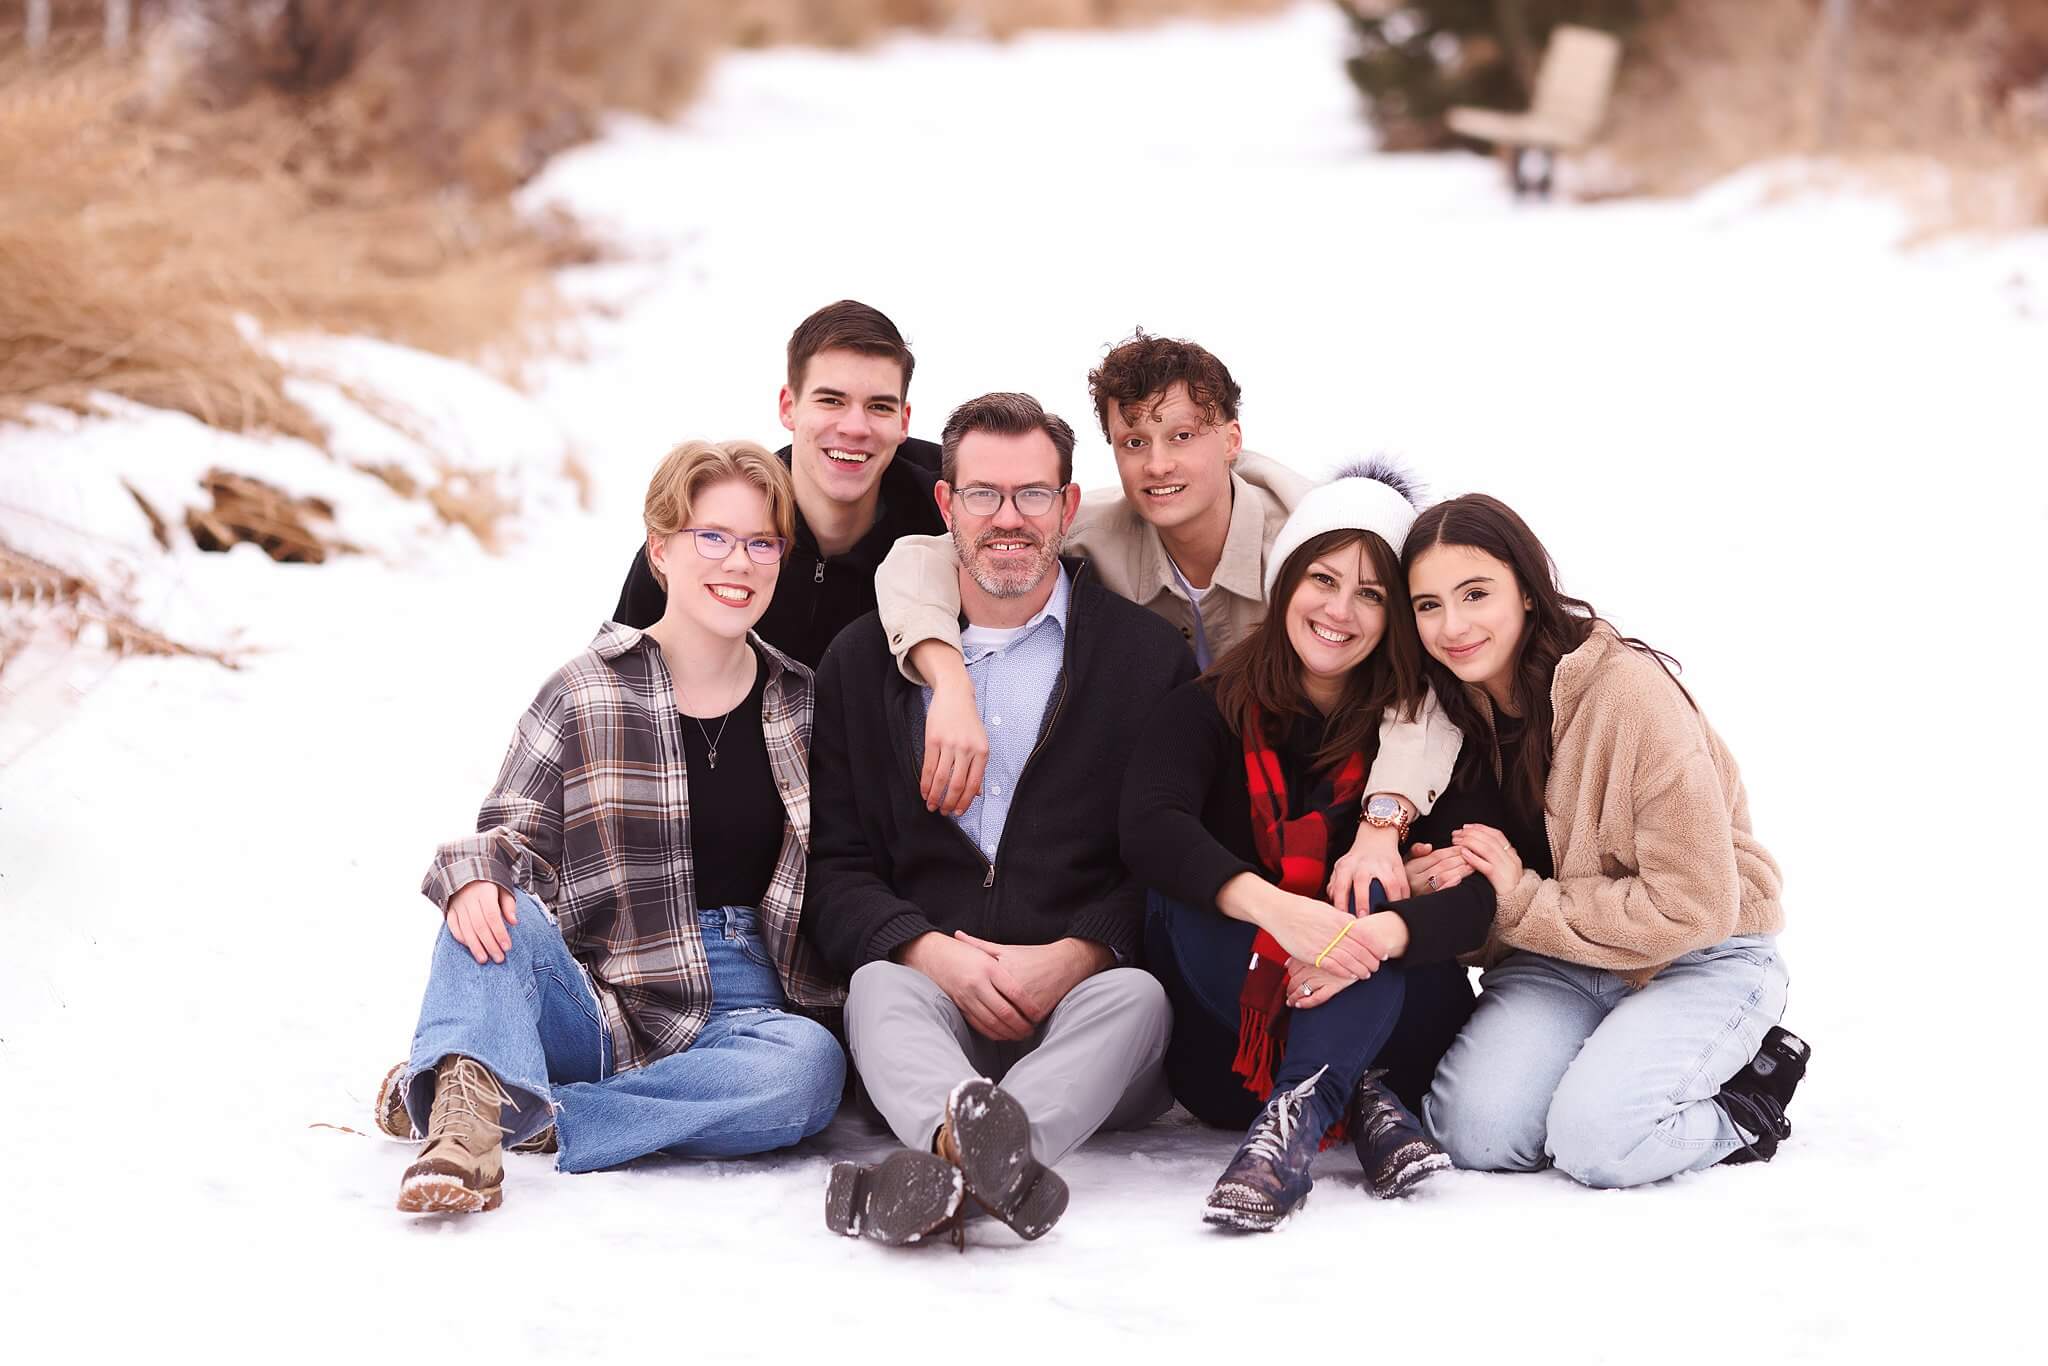 Snowy family photo, parents and four teenage kids sit on a winter path covered in snow